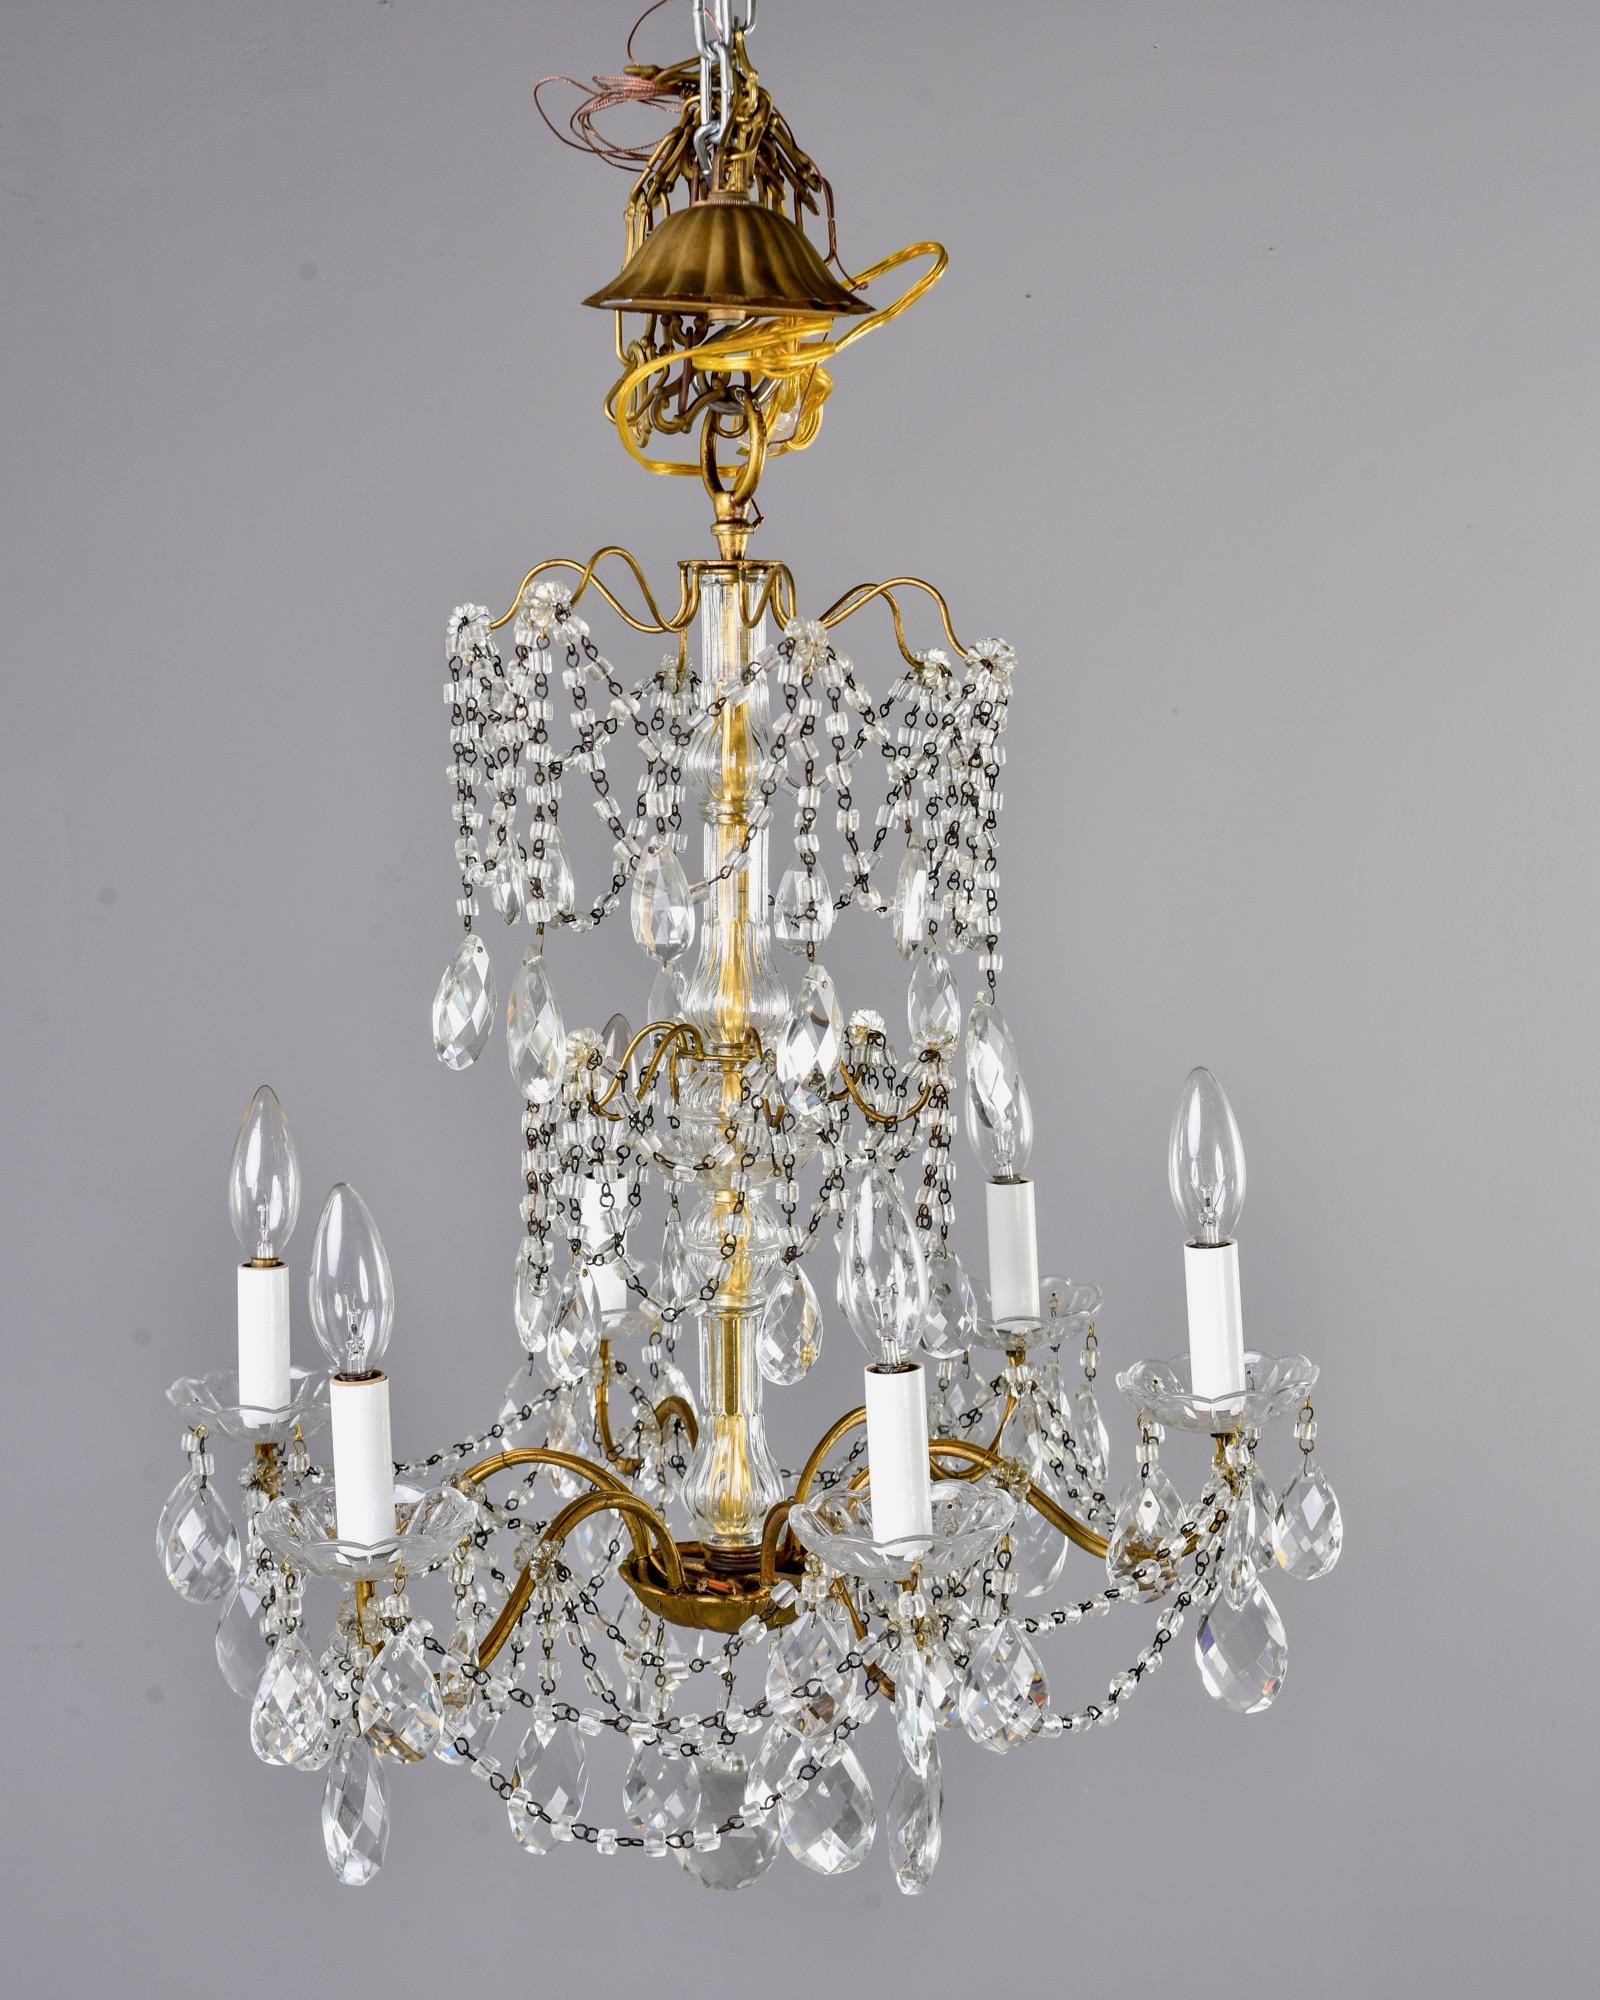 Italian chandelier has six candle style lights with candelabrum sized sockets, faceted tear drop shaped crystals and beaded swag, circa 1930s. Unknown maker. Rewired for US electrical standards.
 